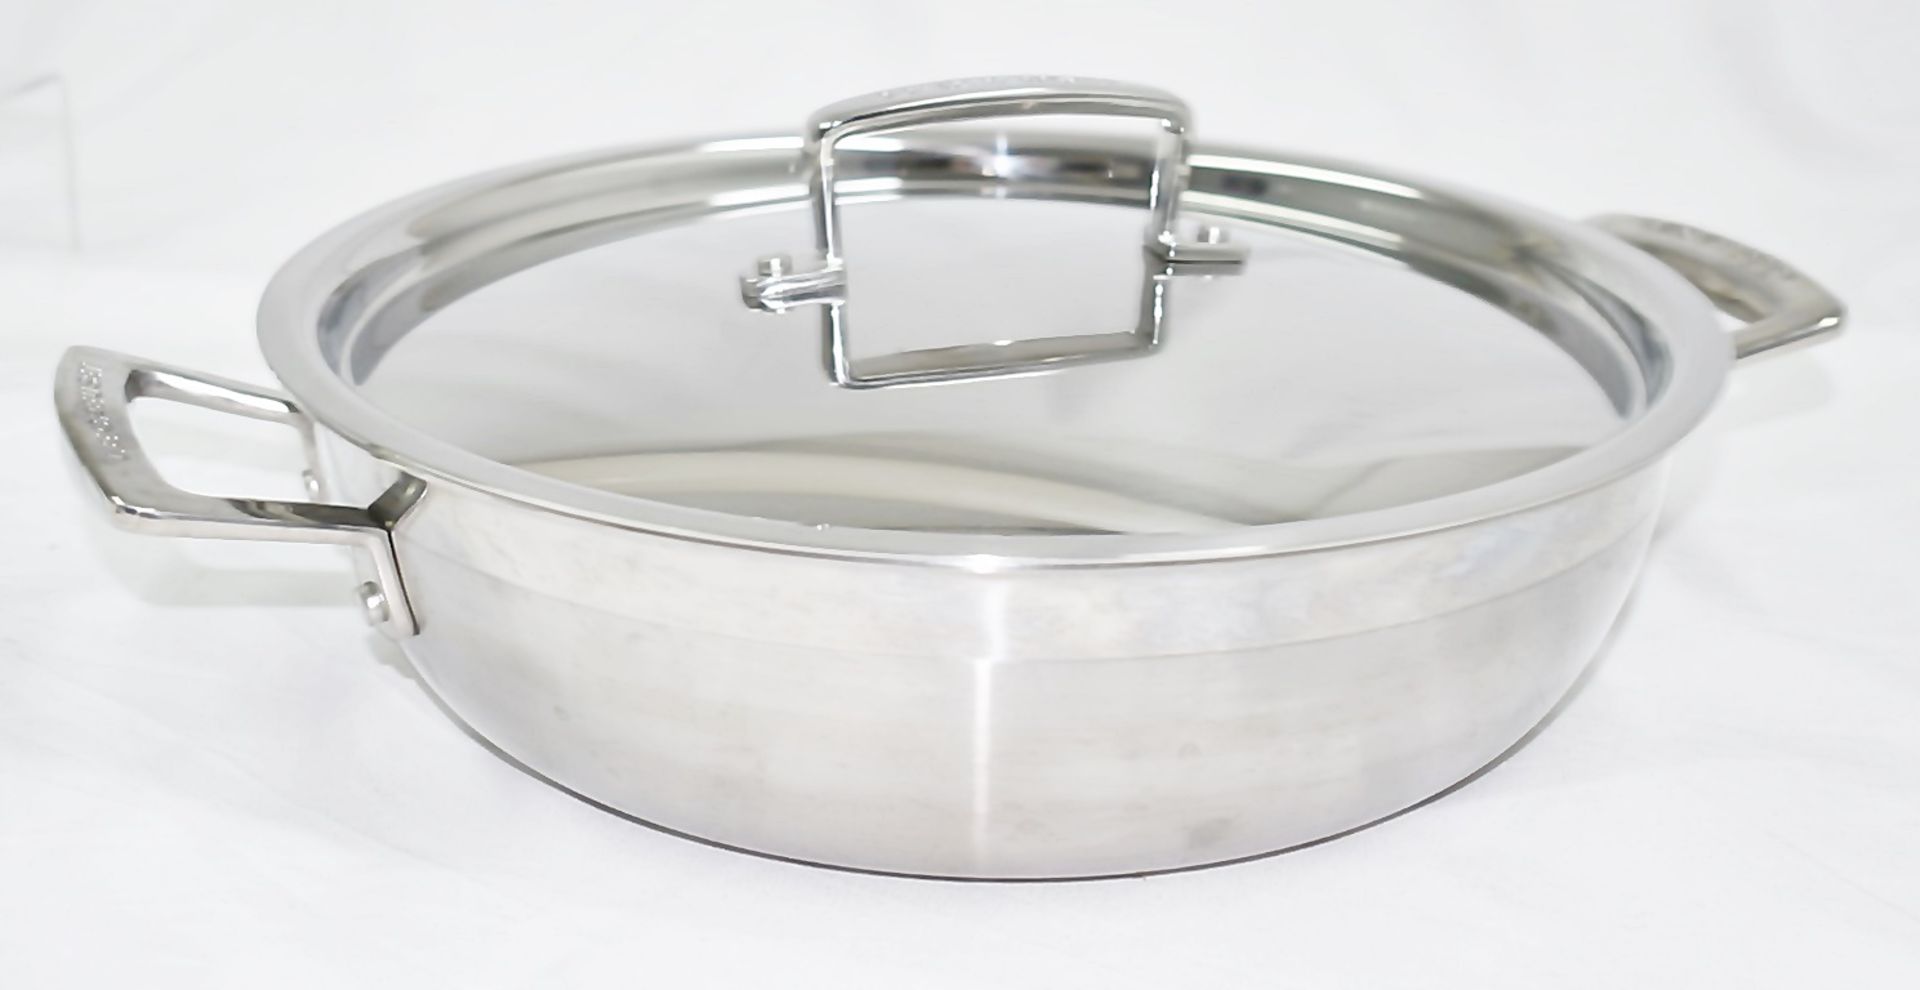 1 x LE CREUSET 3-Ply Stainless Steel Shallow Casserole Dish (26cm) - Original Price £135.00 - Image 4 of 9